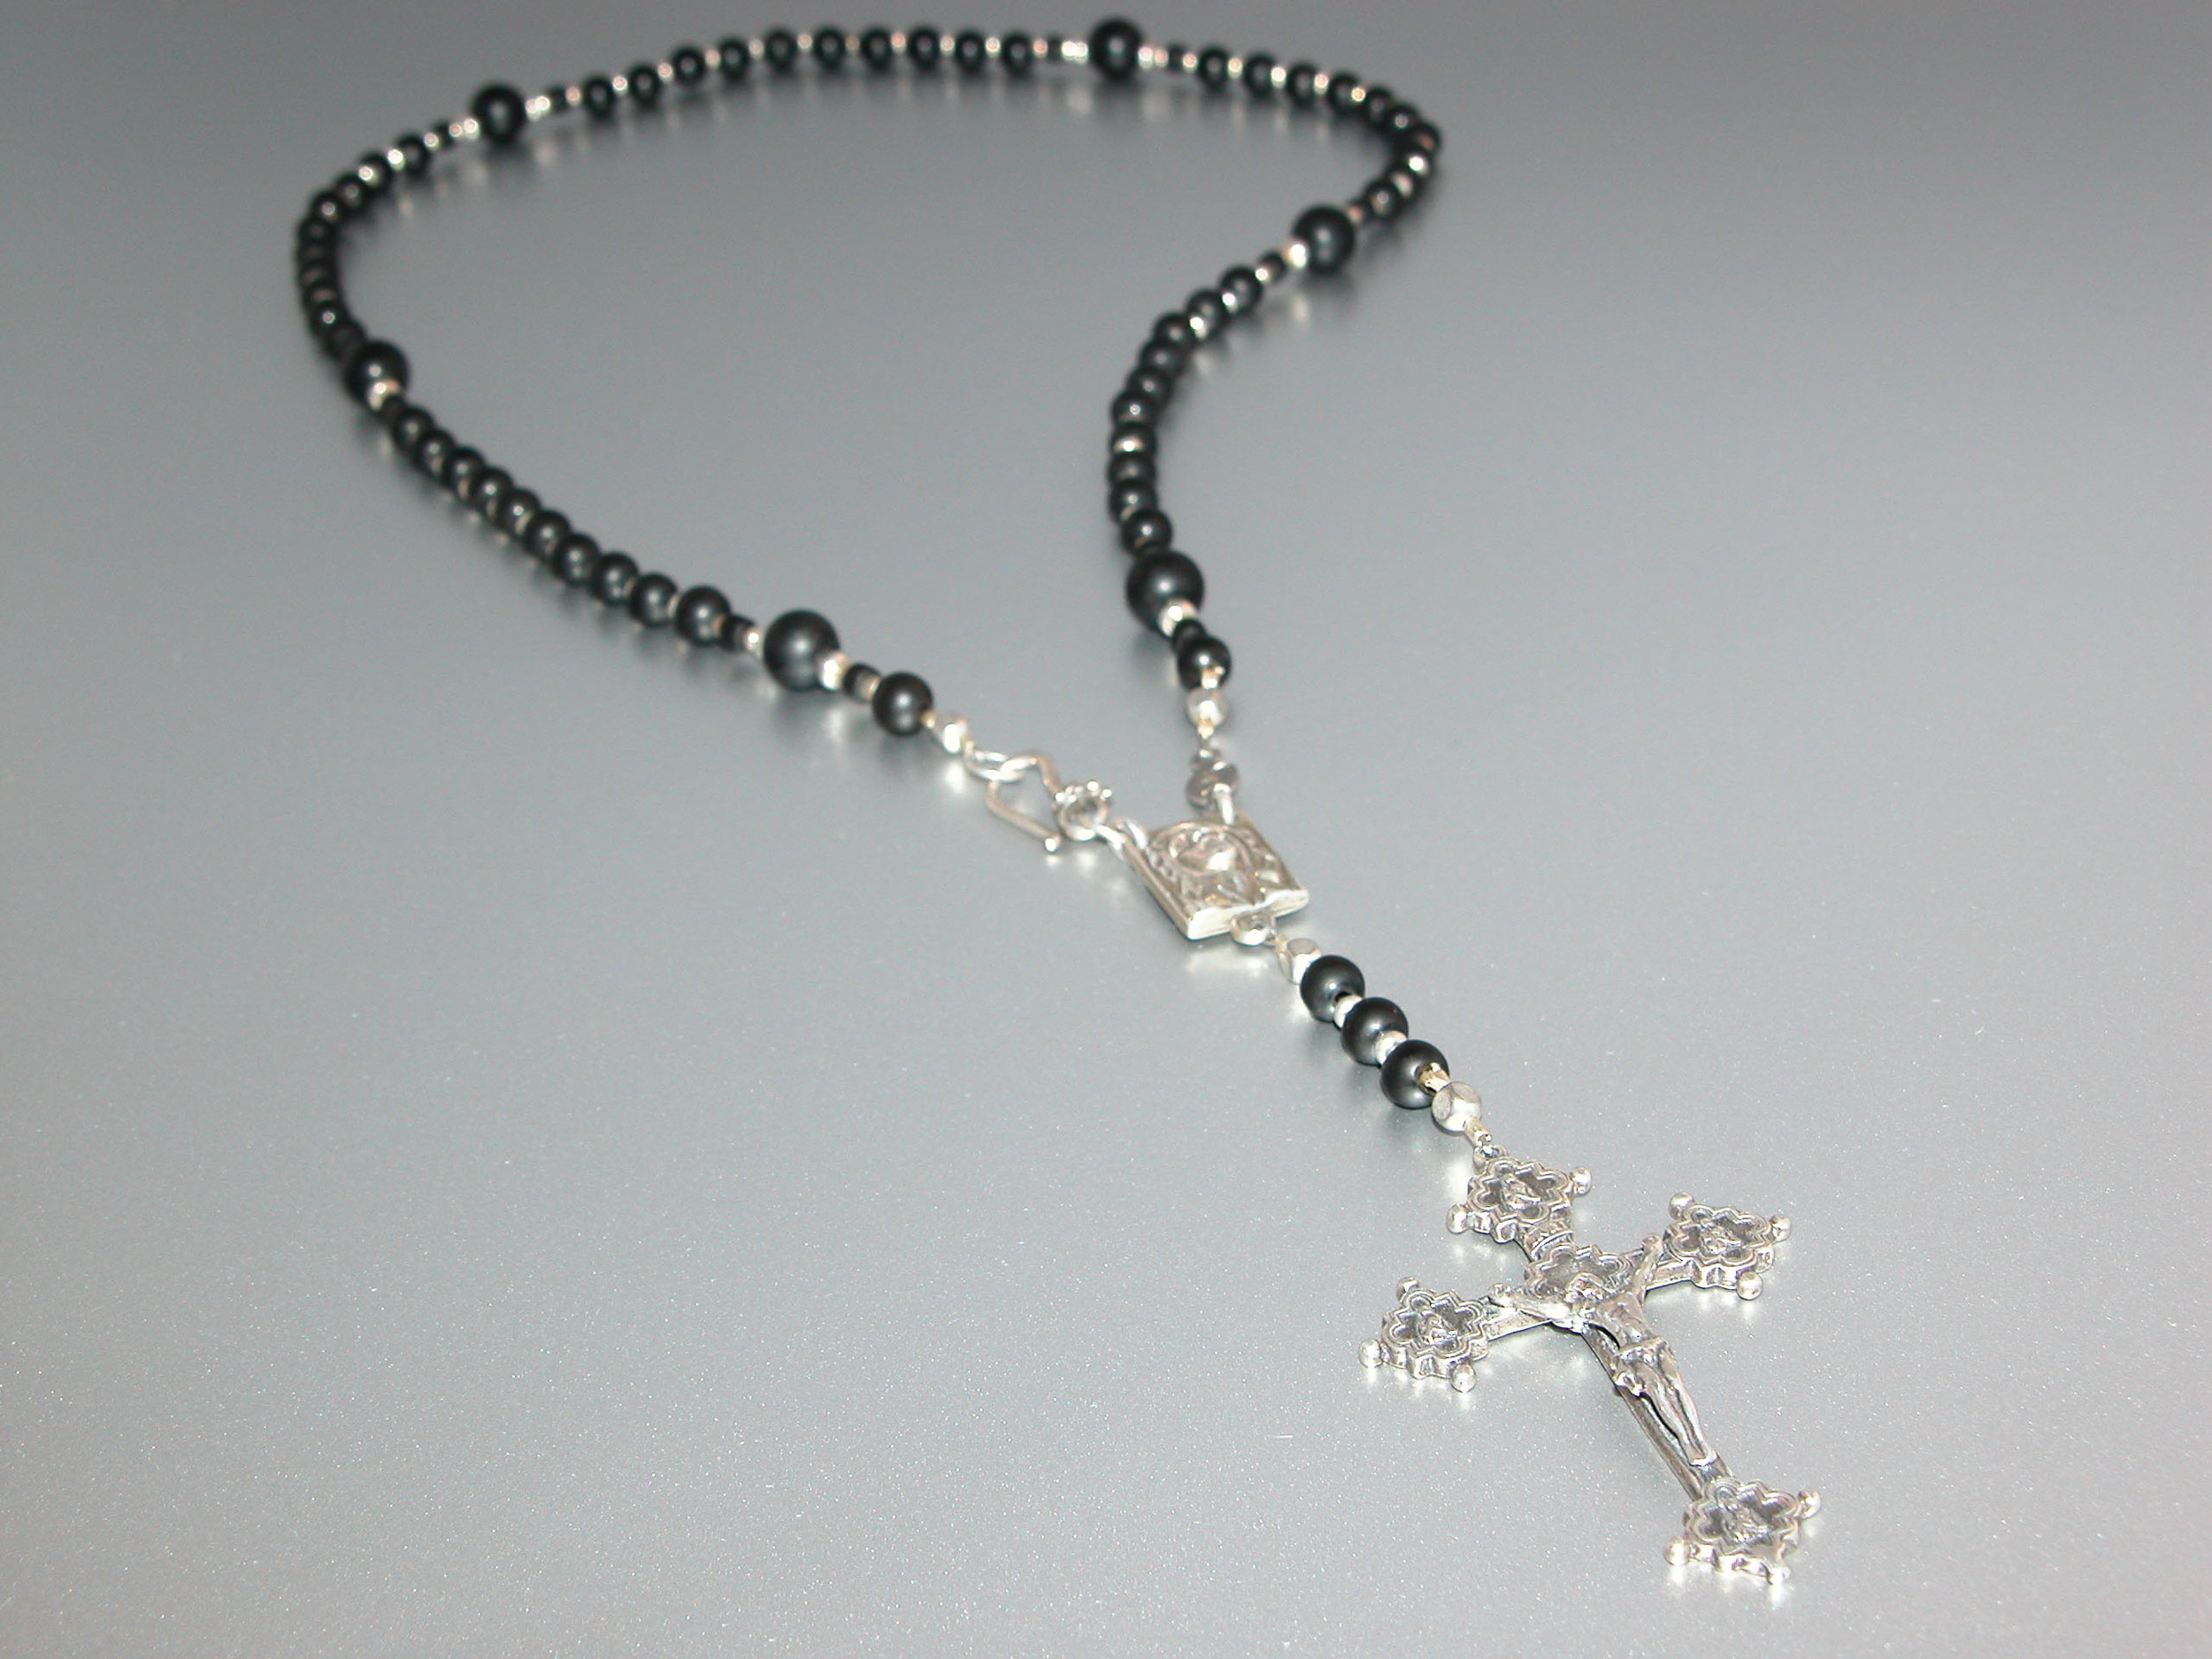 Gothic Rosary Necklace - Gothic Prayer Beads, Pentagram Necklace, Beaded  Trad Goth Necklace, Gothic Cross Necklace